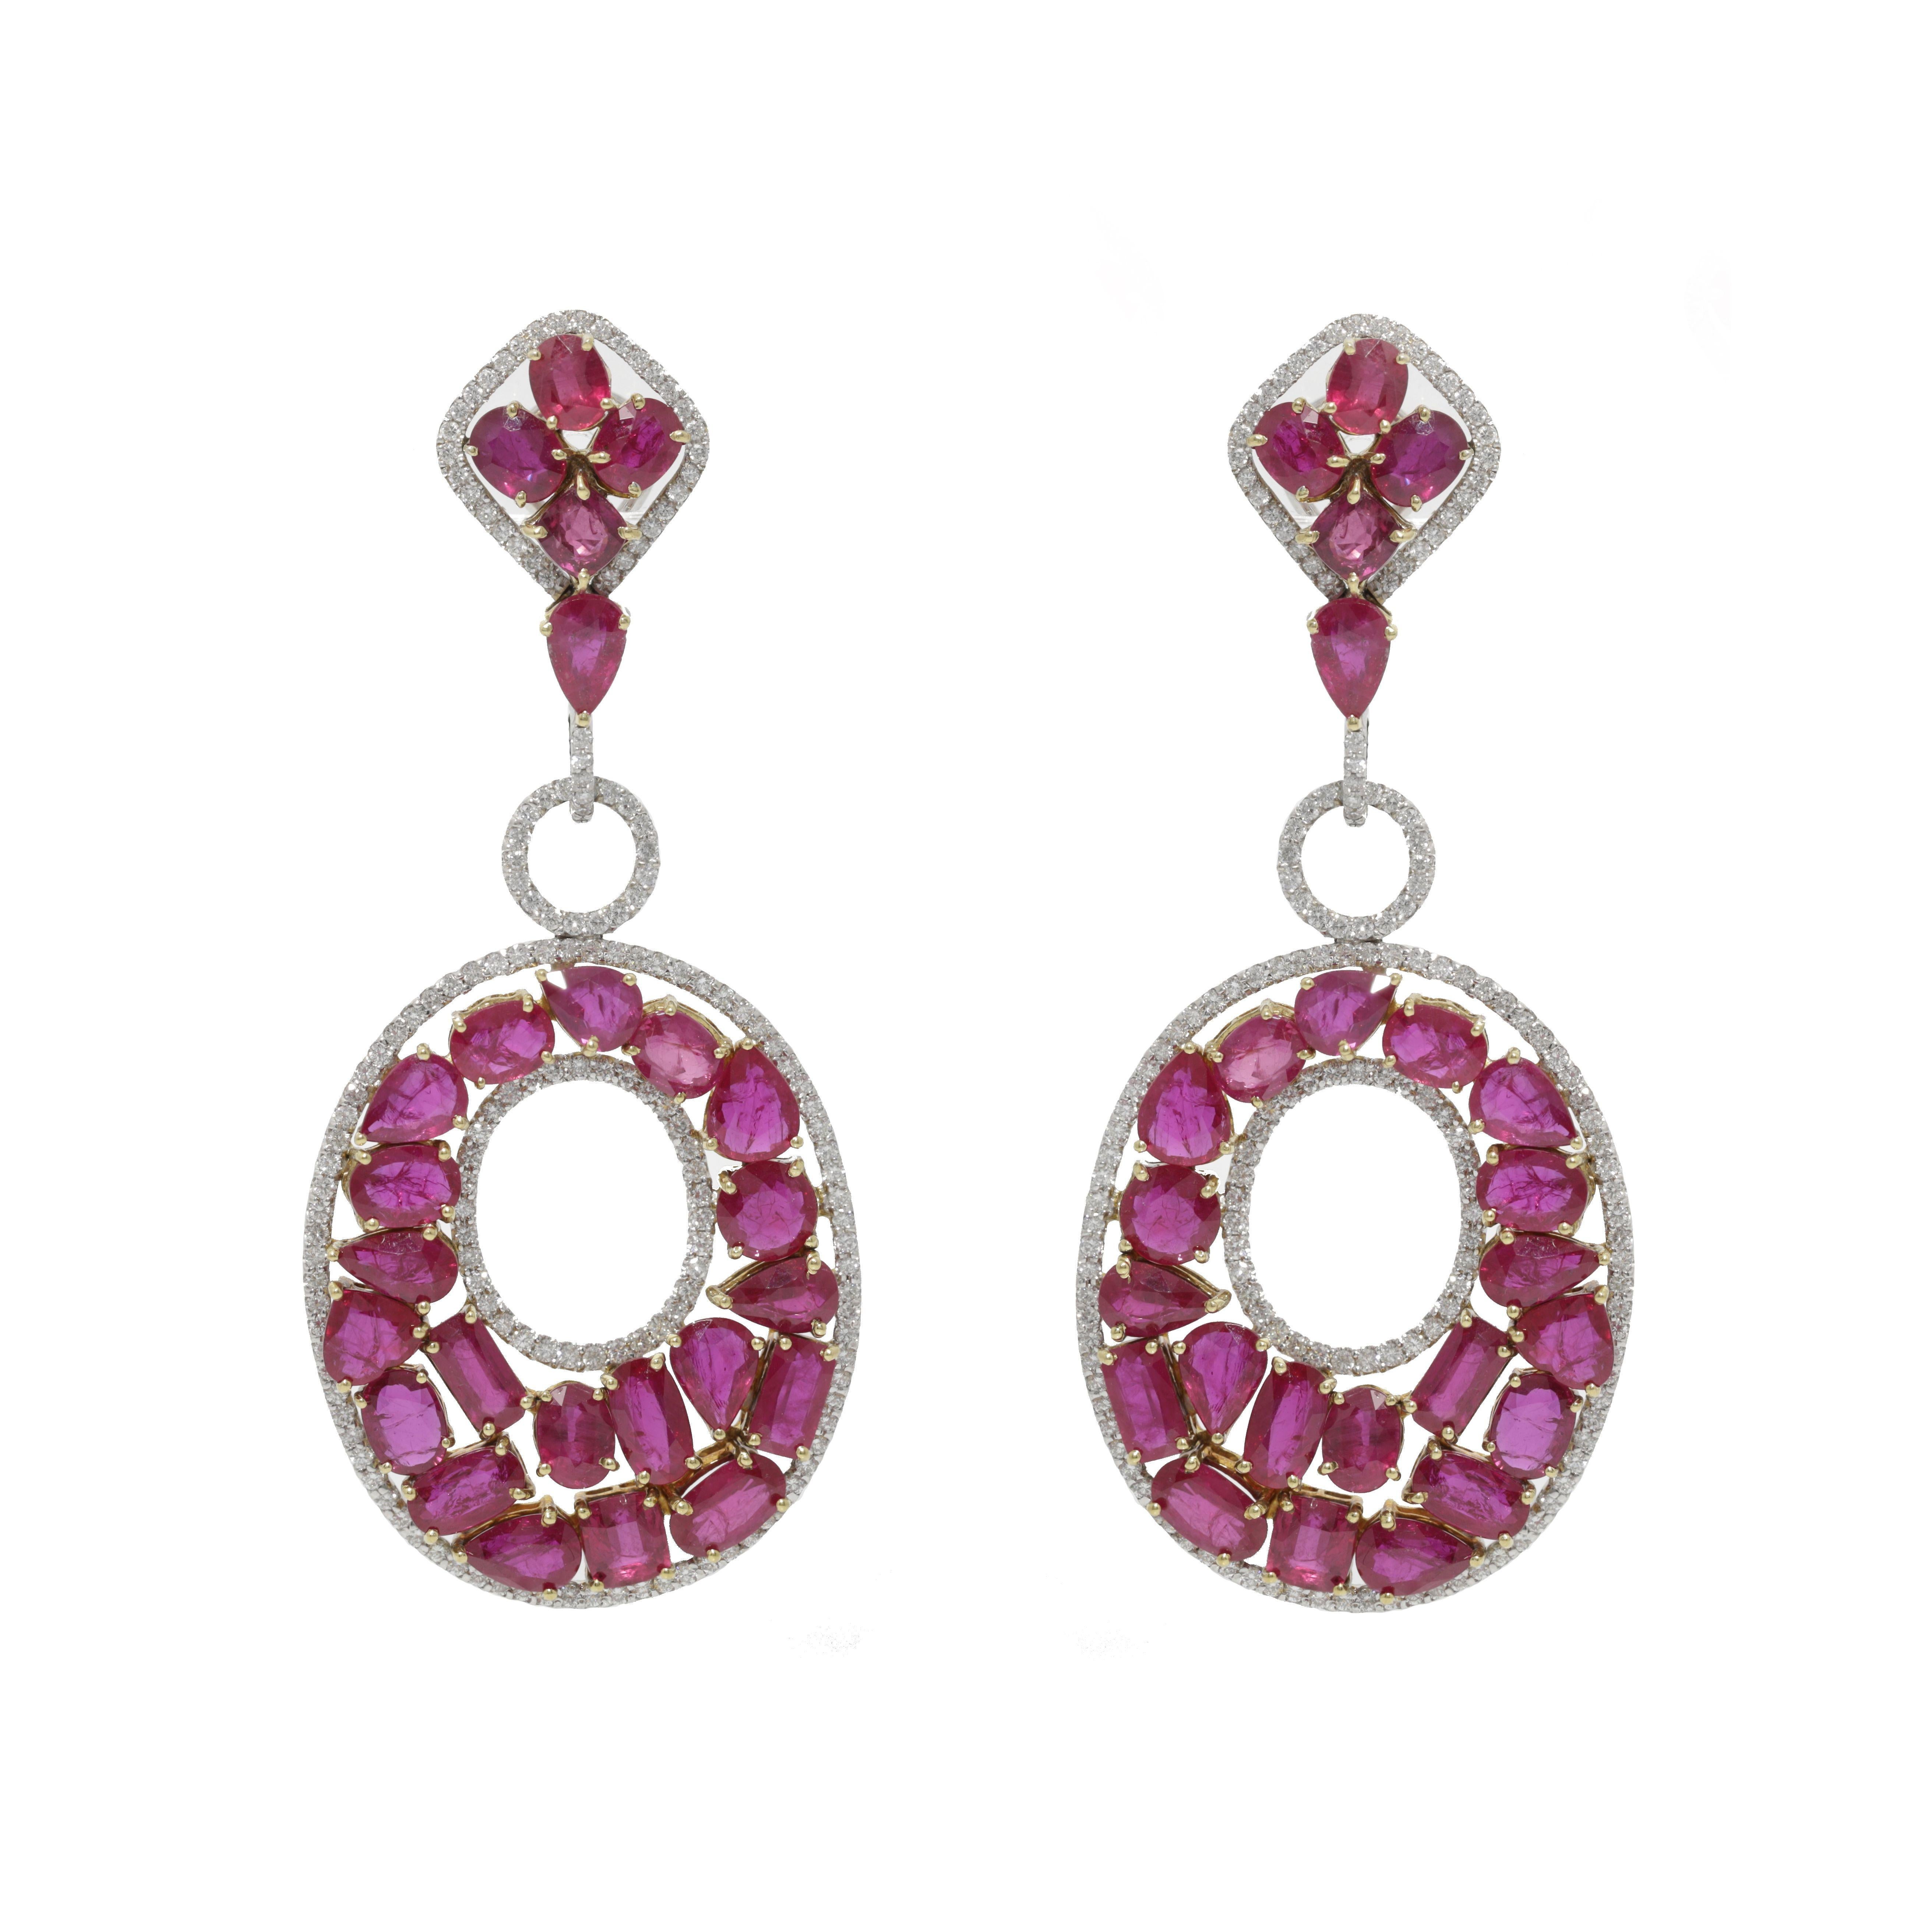 Ruby and diamond chandelier earrings with 53.20ct of rubies and 7.65ct of diamonds set in 18kt white and yellow gold.